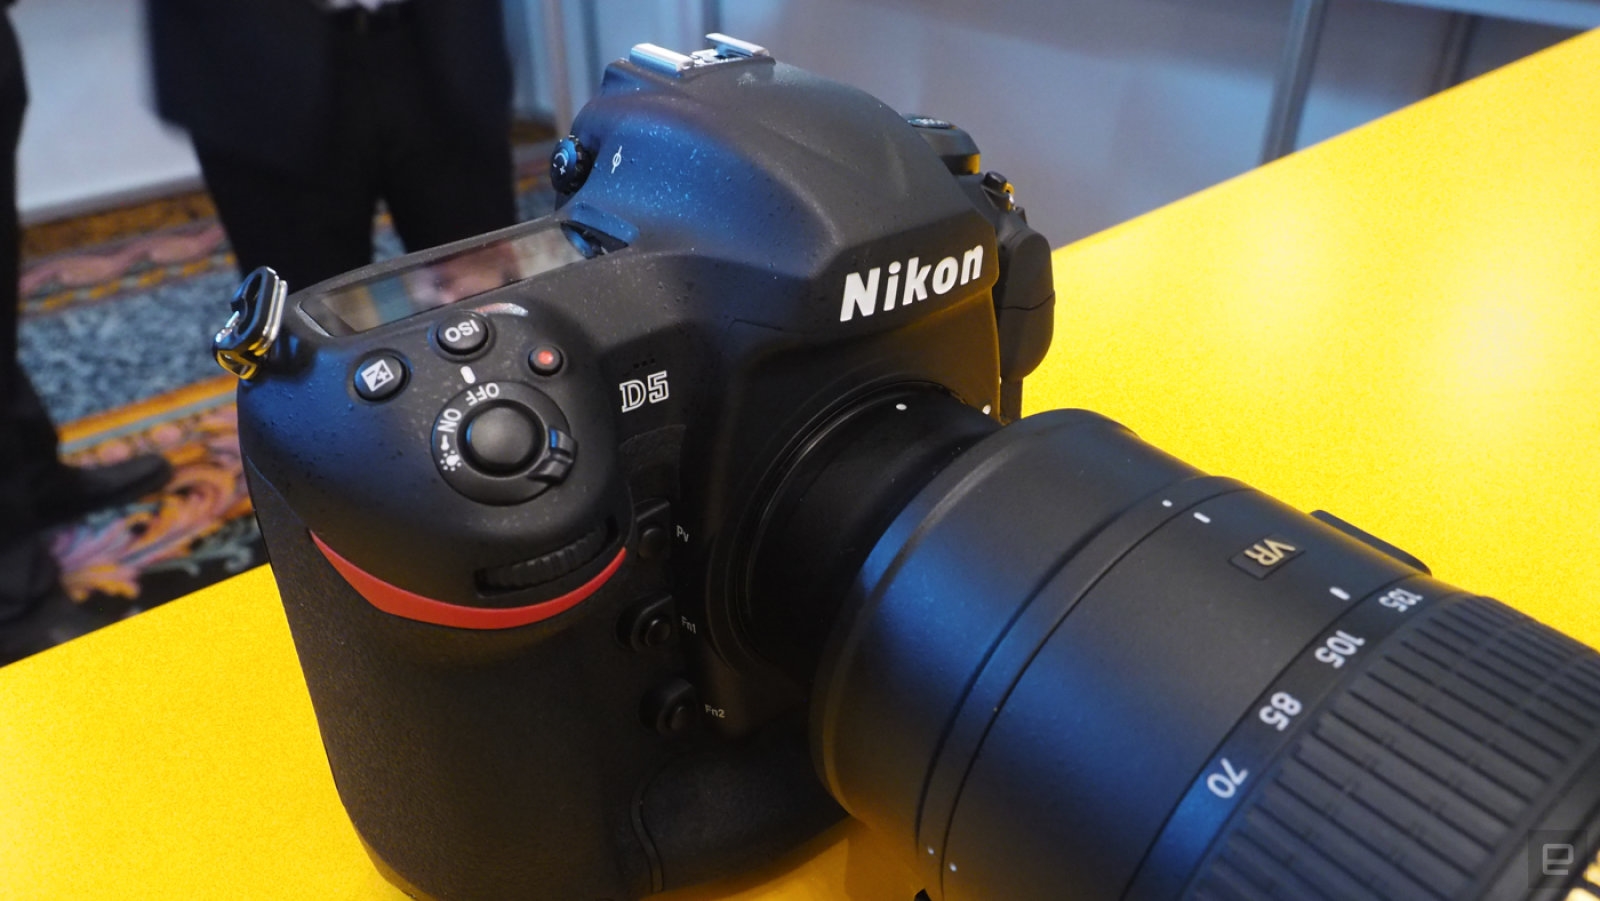 Nikon plans an answer to Sony's A9 mirrorless pro camera | DeviceDaily.com